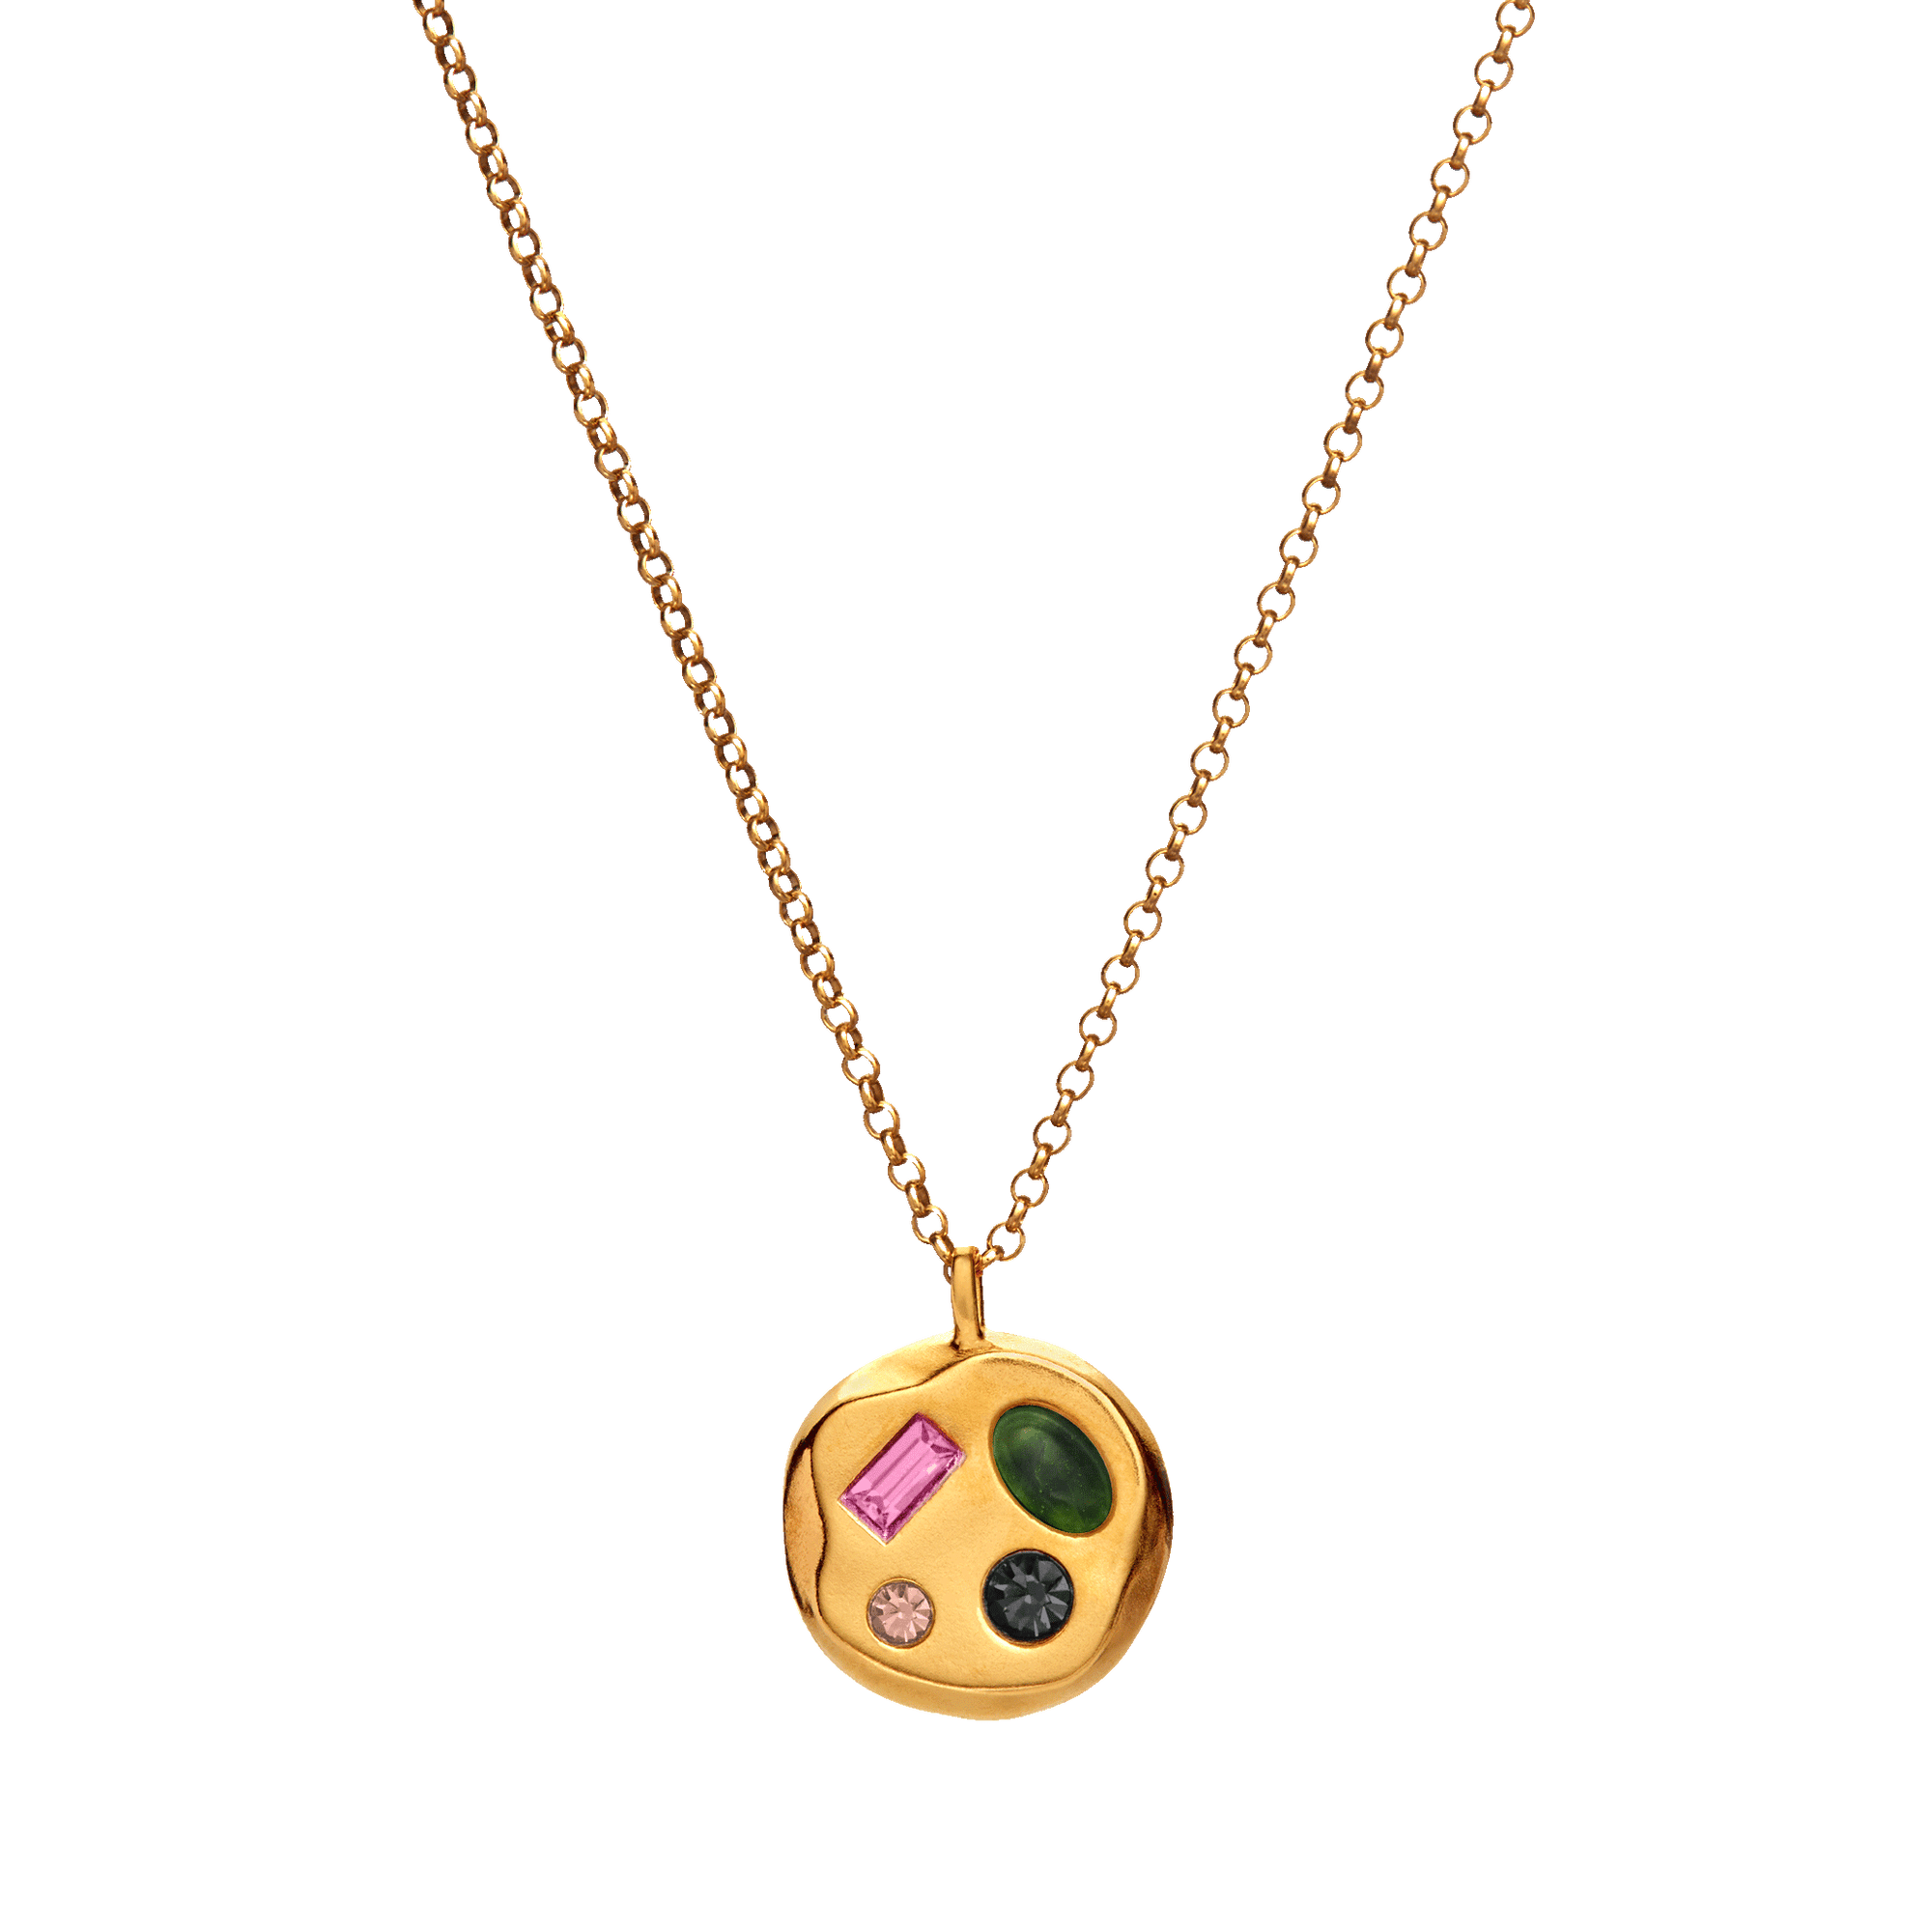 The October First Pendant